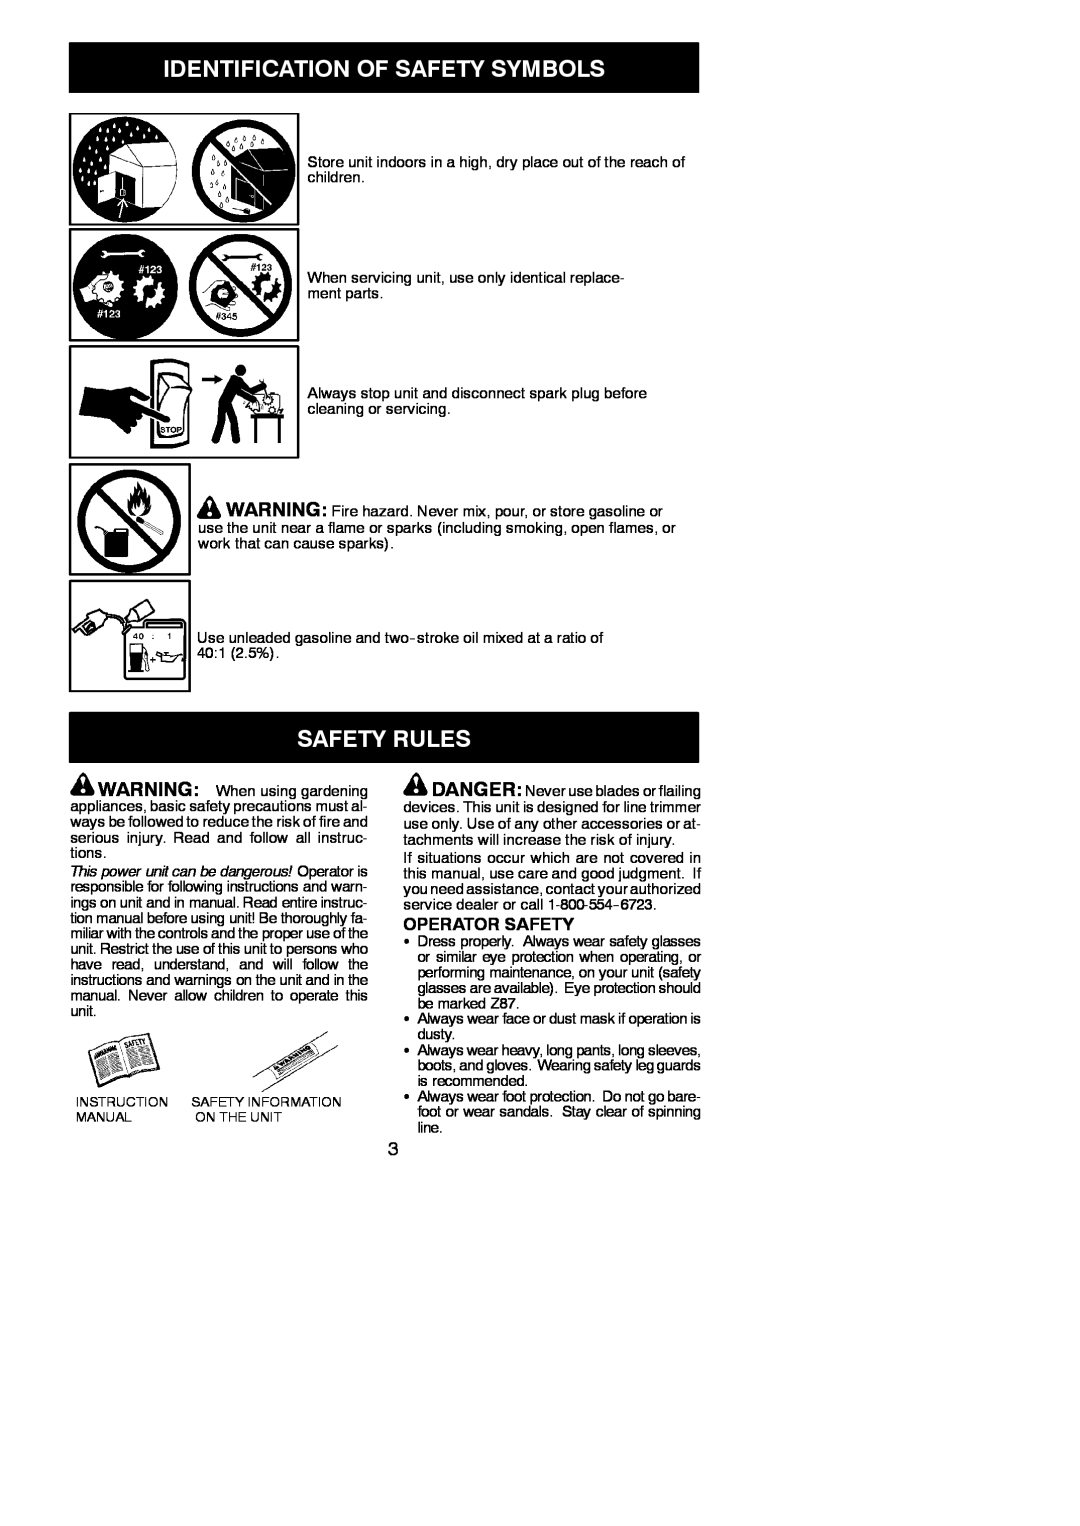 Weed Eater FX26SC, 545186796 instruction manual Safety Rules, Identification Of Safety Symbols, Operator Safety 